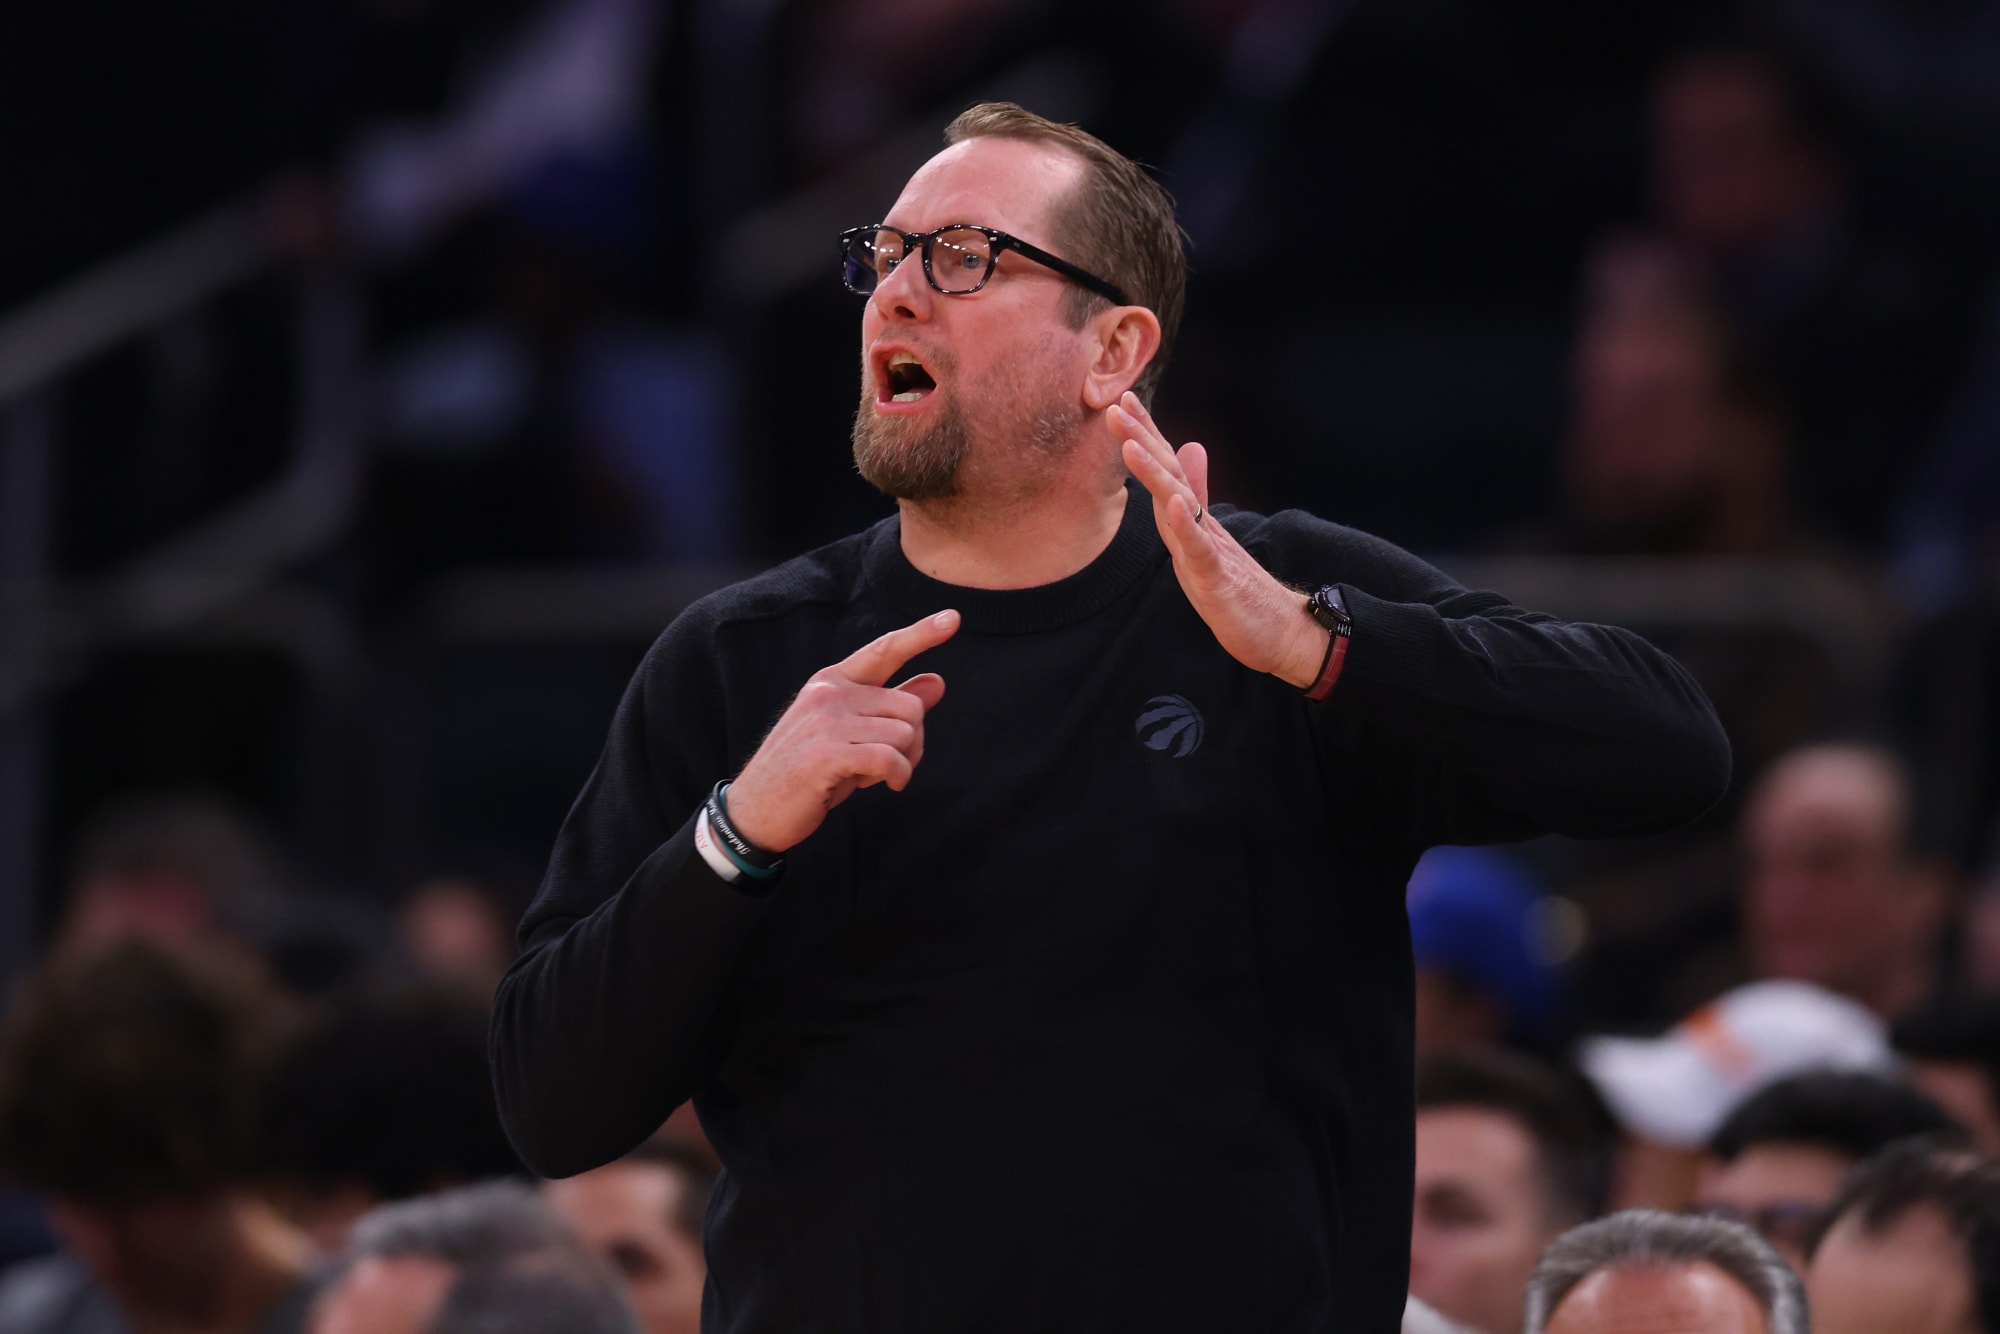 Raptors news: 905 players called up, patience with Nick Nurse waning?